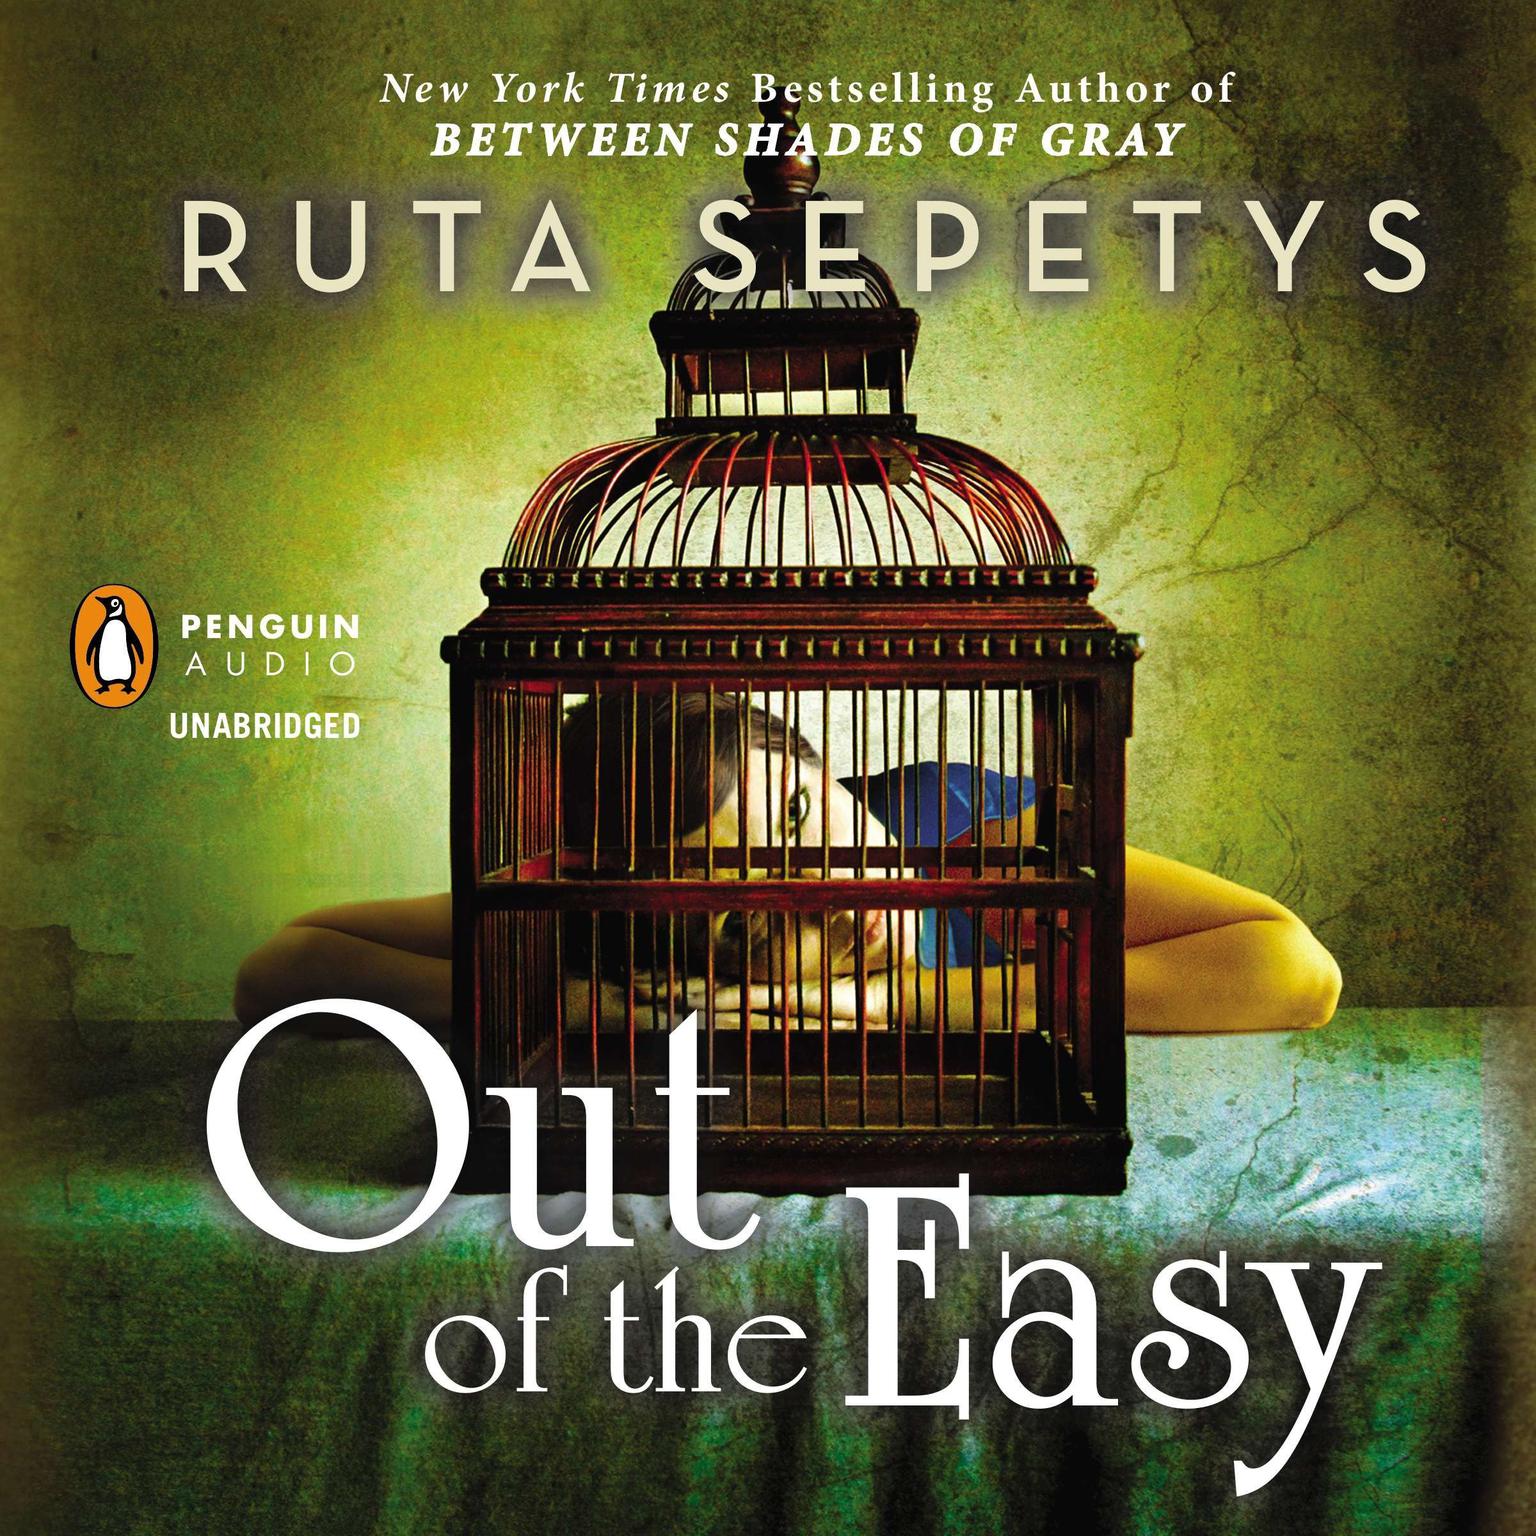 Out of the Easy Audiobook, by Ruta Sepetys